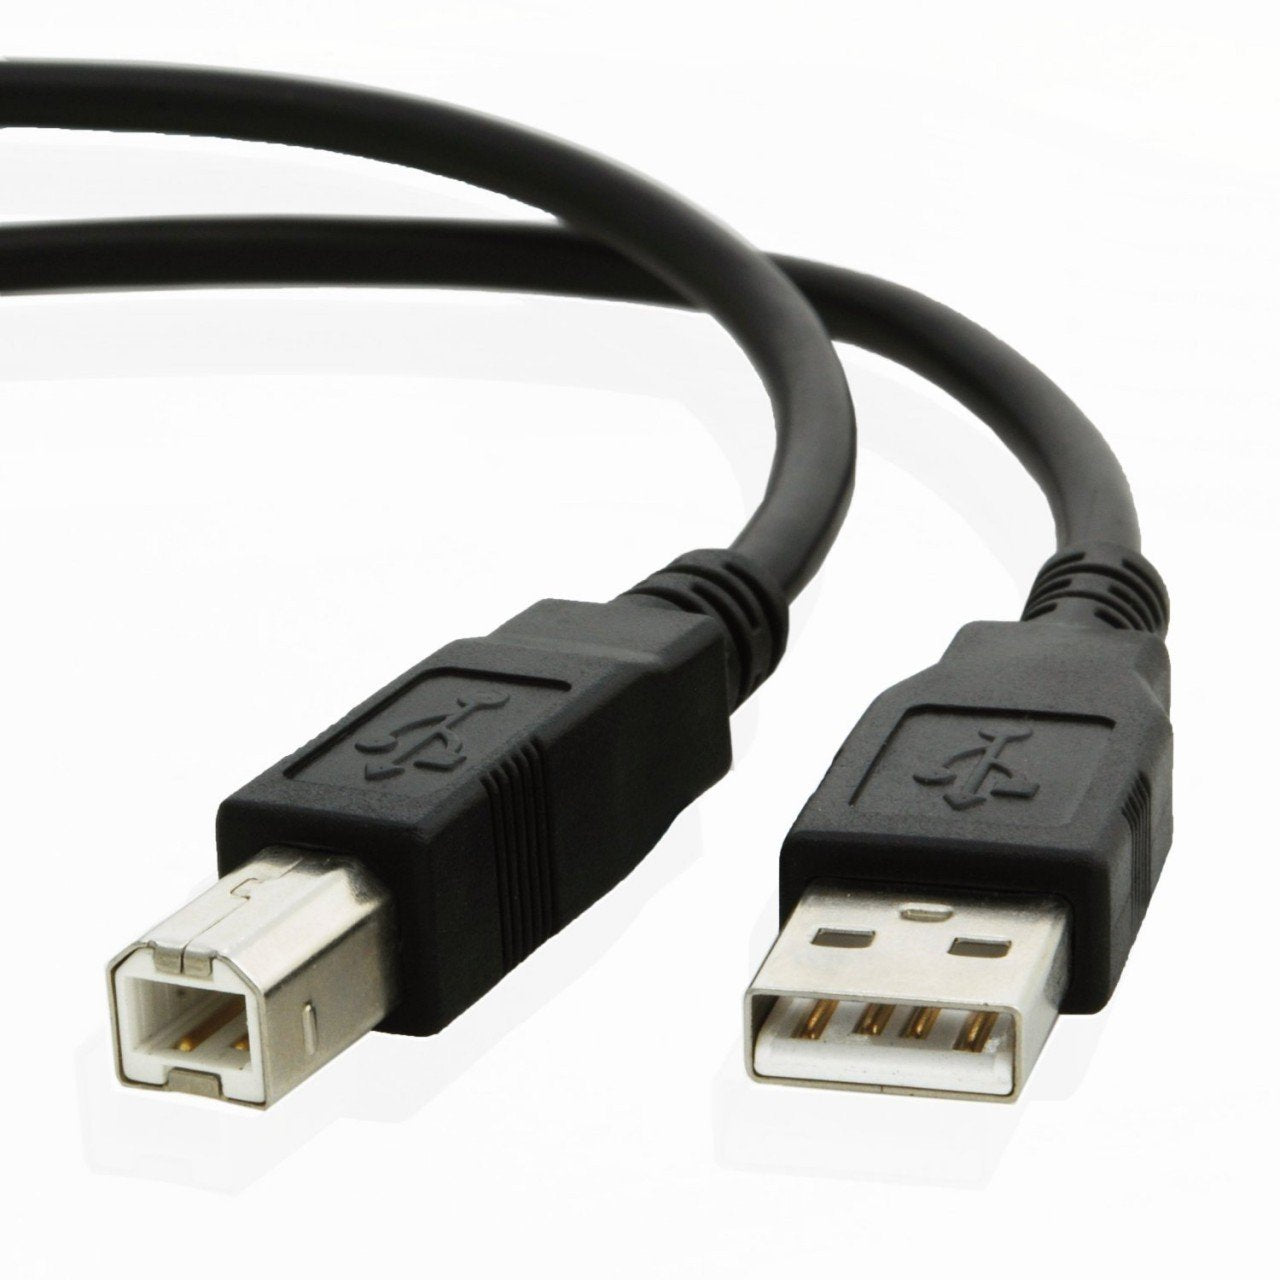 USB cable for Dell H815dw